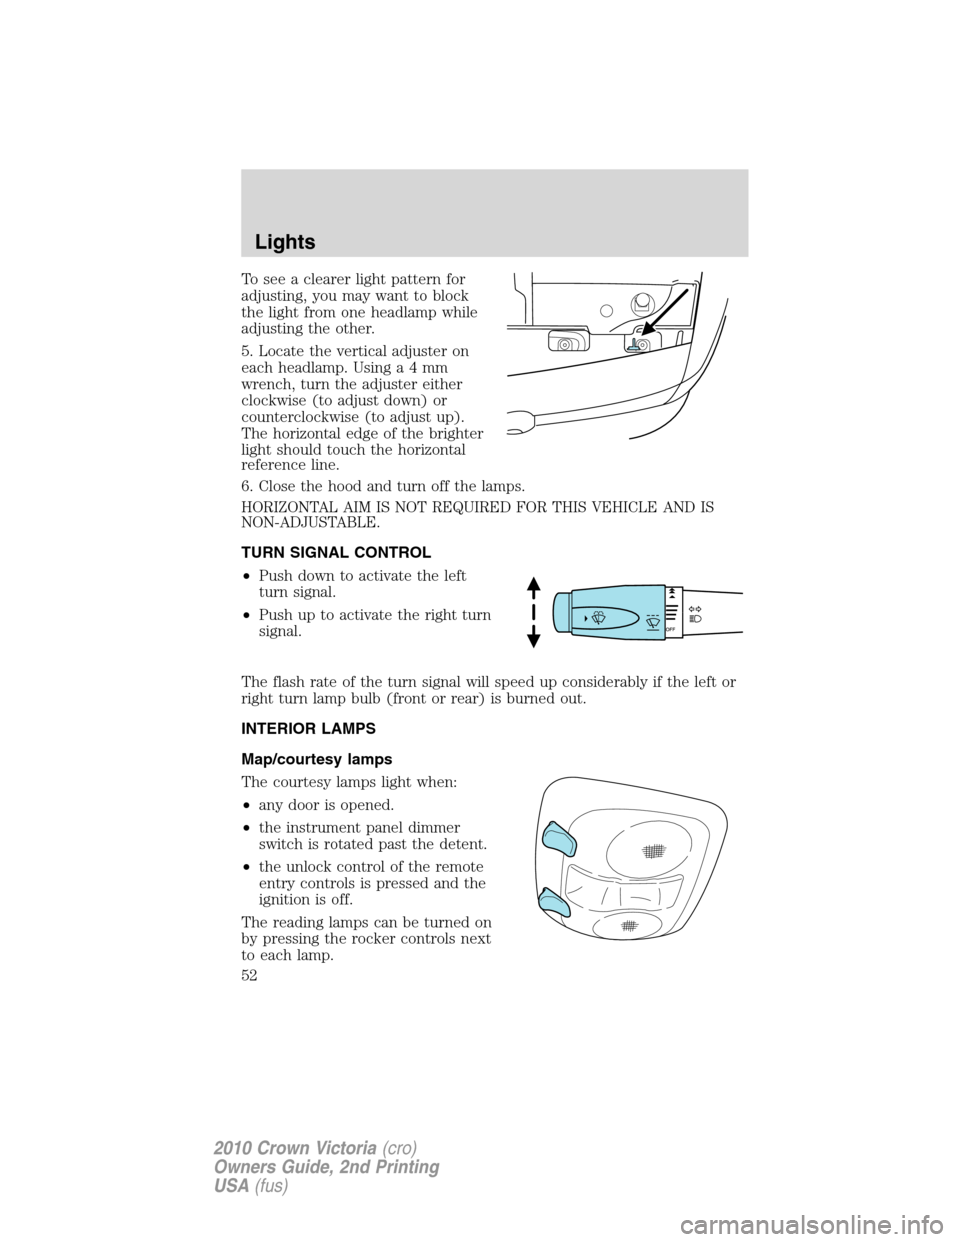 Mercury Grand Marquis 2010  s Workshop Manual To see a clearer light pattern for
adjusting, you may want to block
the light from one headlamp while
adjusting the other.
5. Locate the vertical adjuster on
each headlamp. Usinga4mm
wrench, turn the 